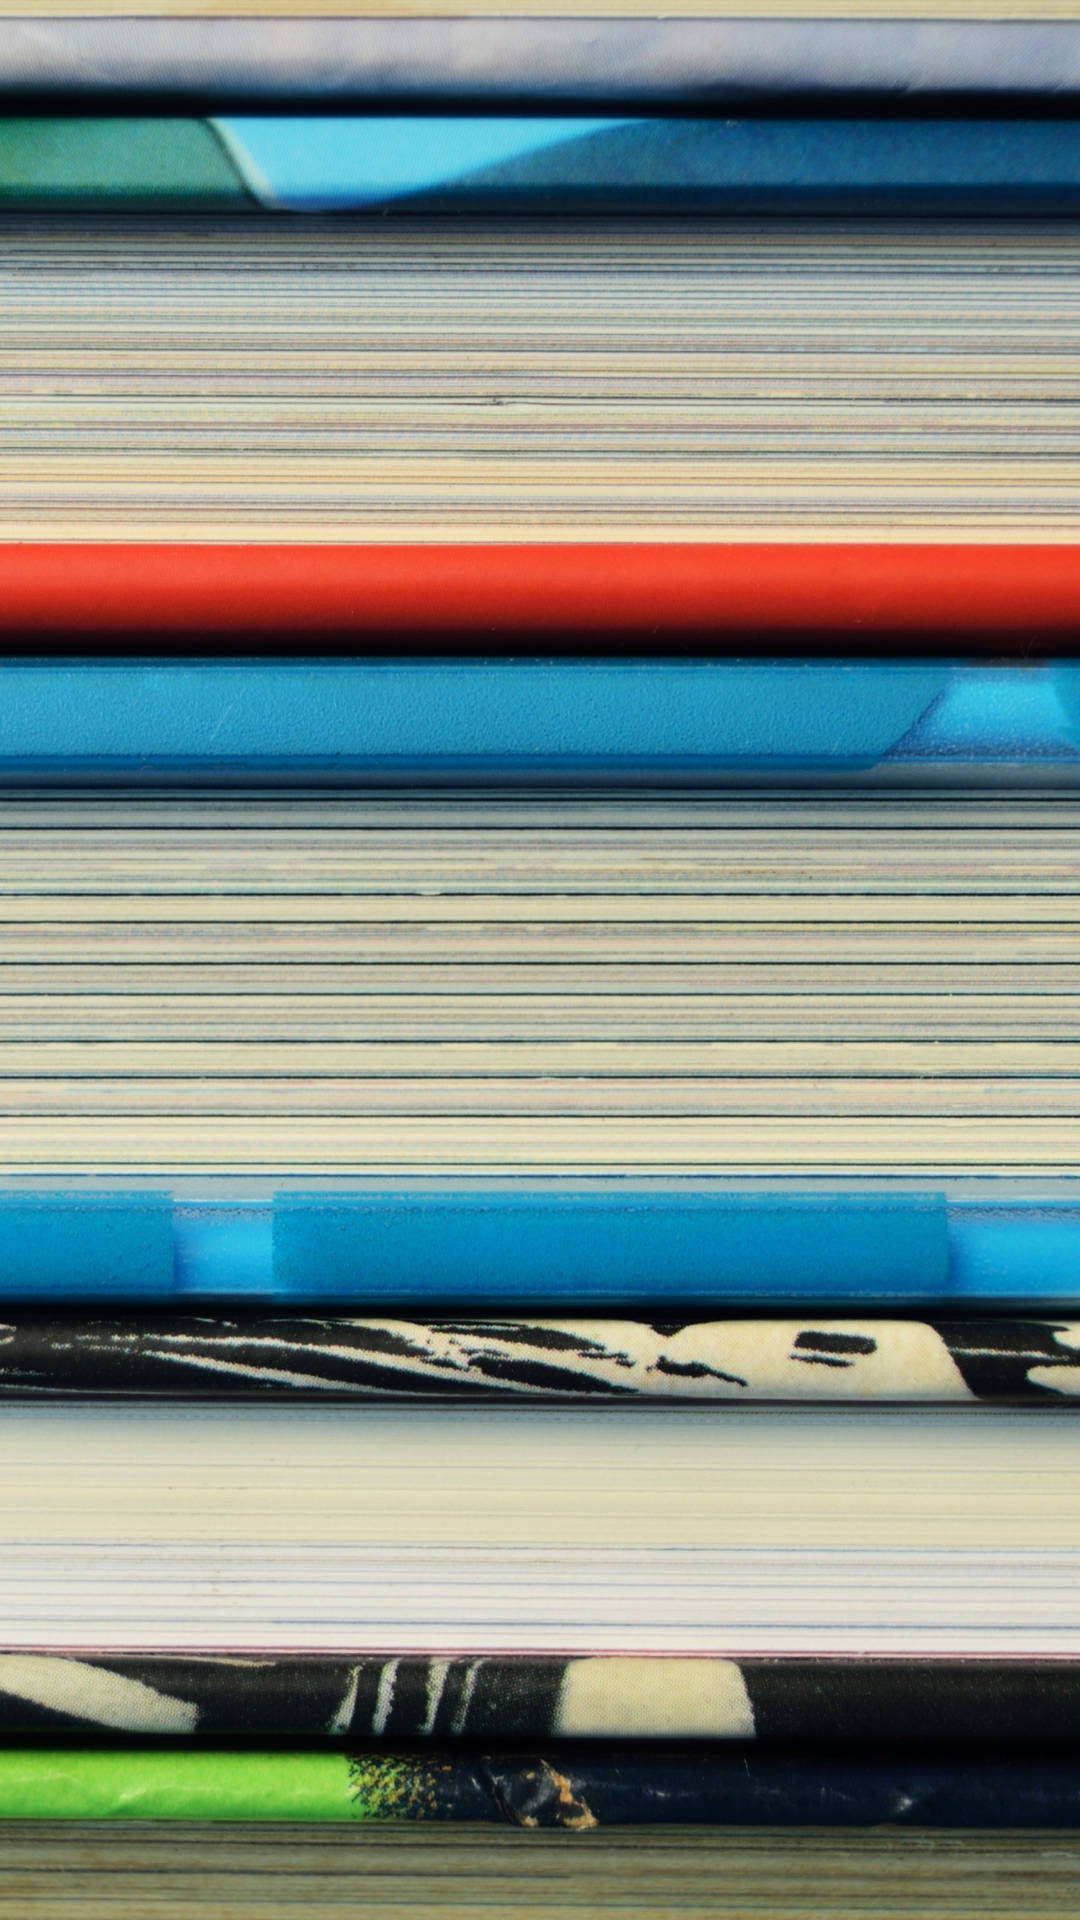 Samsung Galaxy S7 Edge Displayed on a Stack of Books Wallpaper